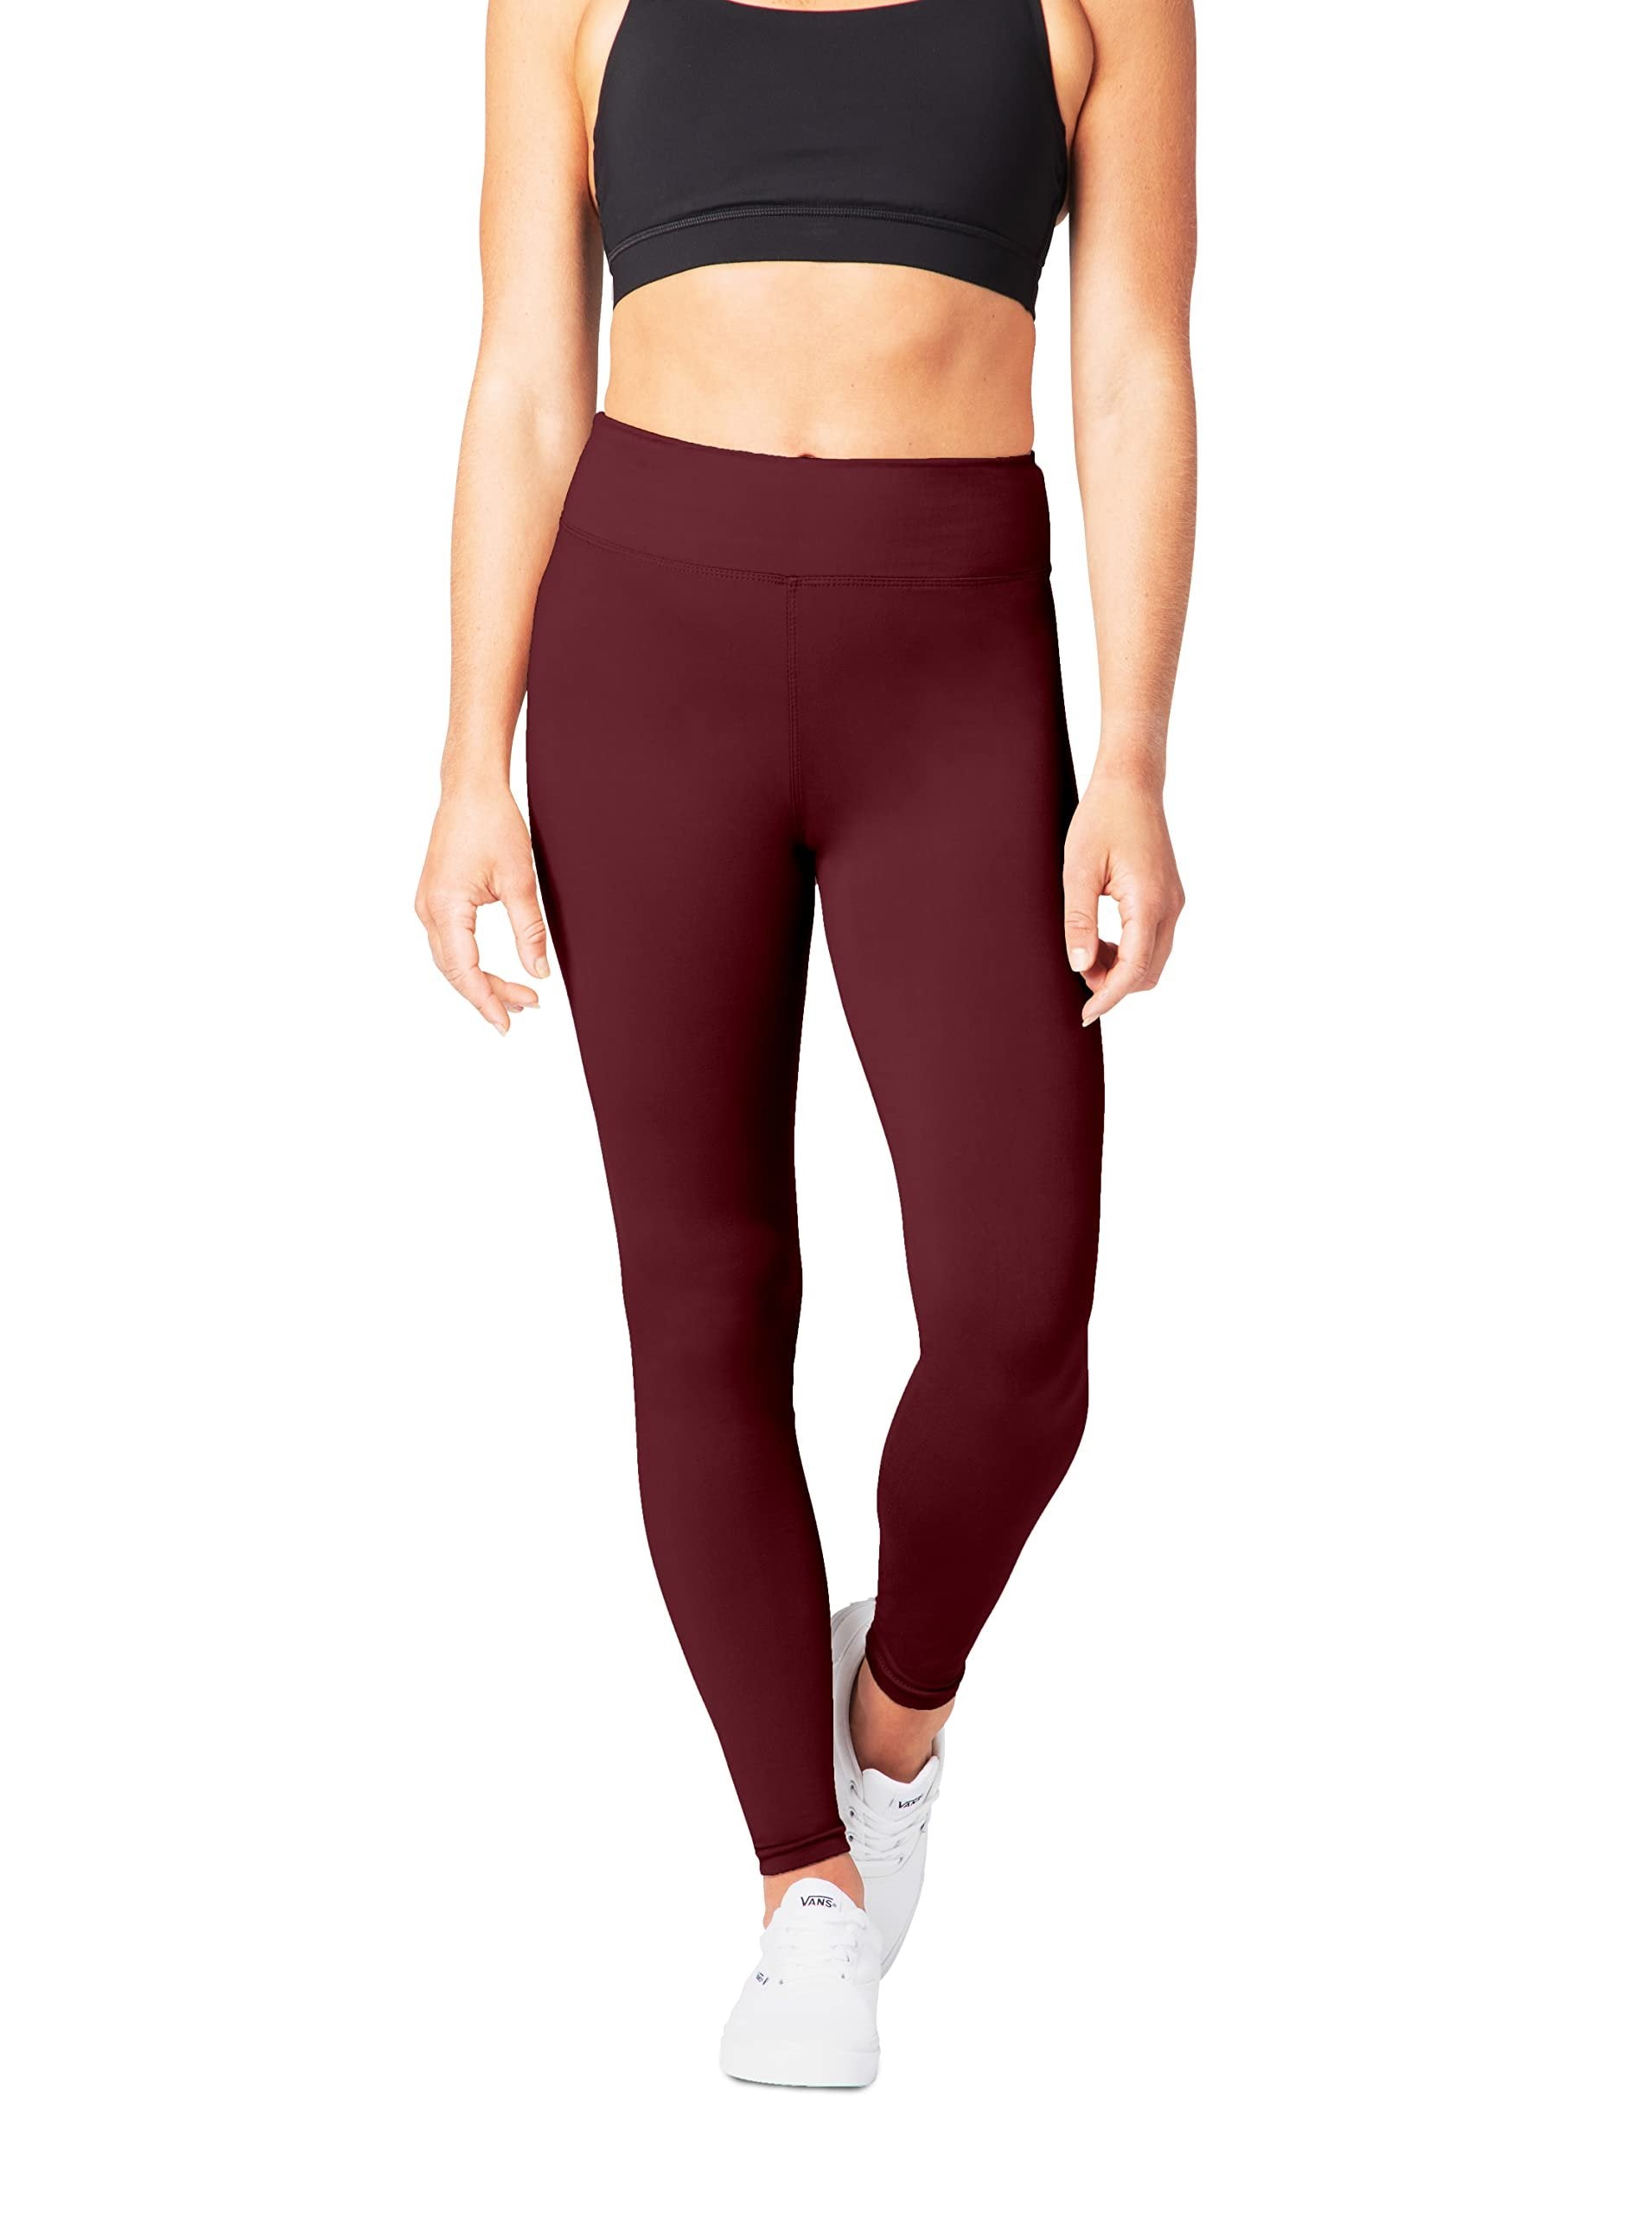 SATINA Burgundy High Waisted Leggings for Women | 3 Inch Waistband | Regular & Plus Size Available | Free Shipping & Returns